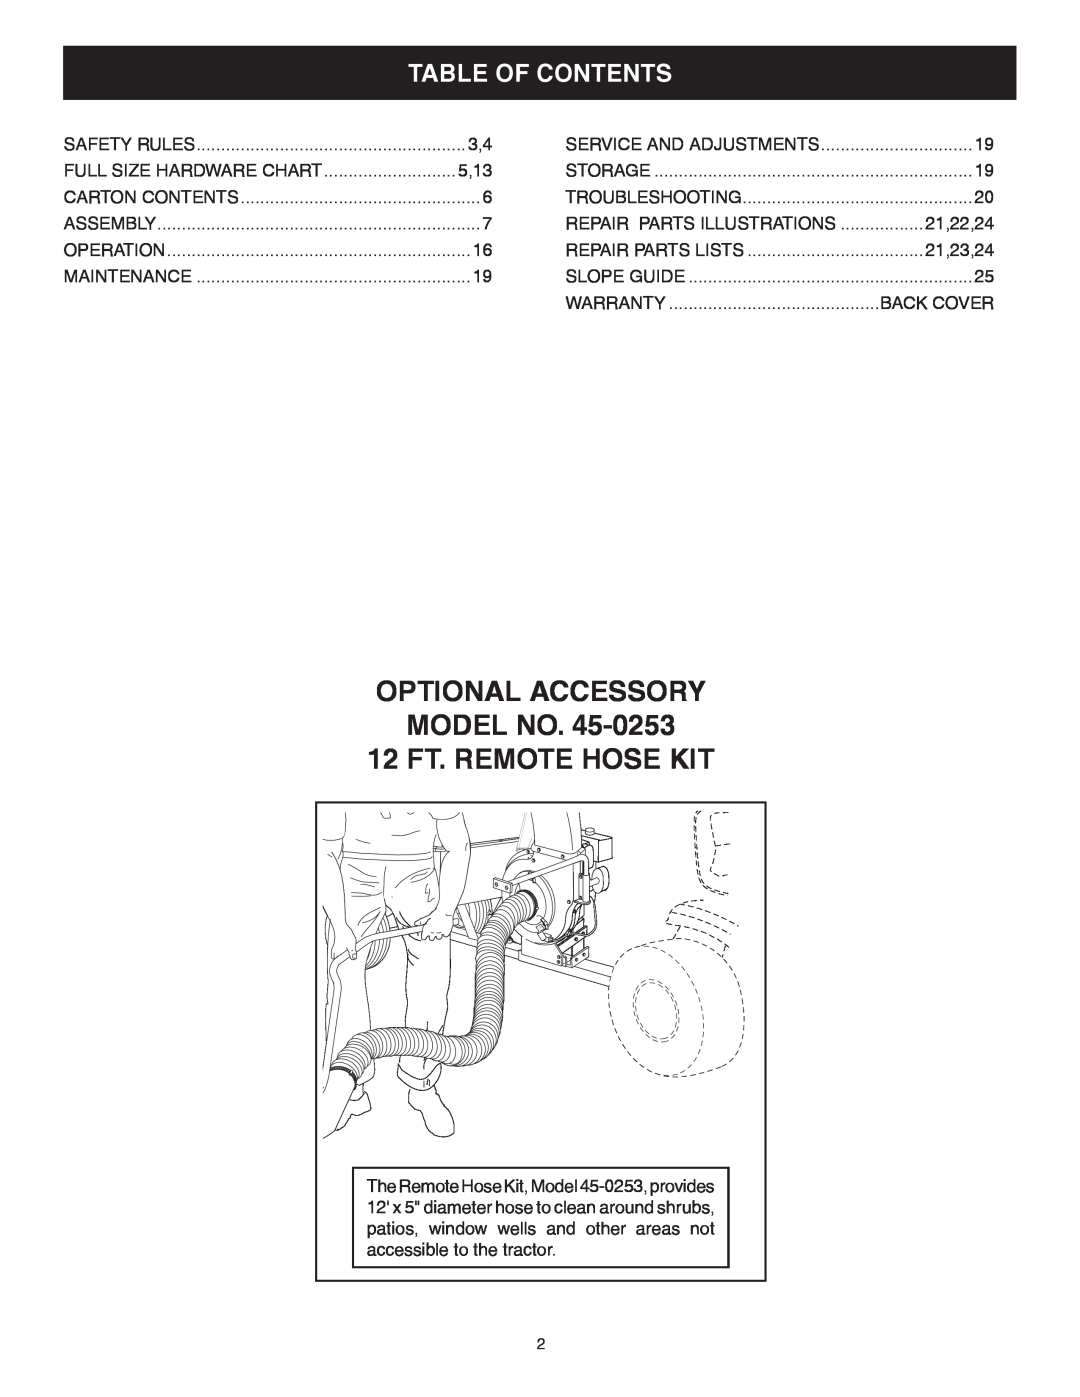 Sears 502493, 552493 manual OPTIONAL ACCESSORY MODEL NO 12 FT. REMOTE HOSE KIT, Table Of Contents 